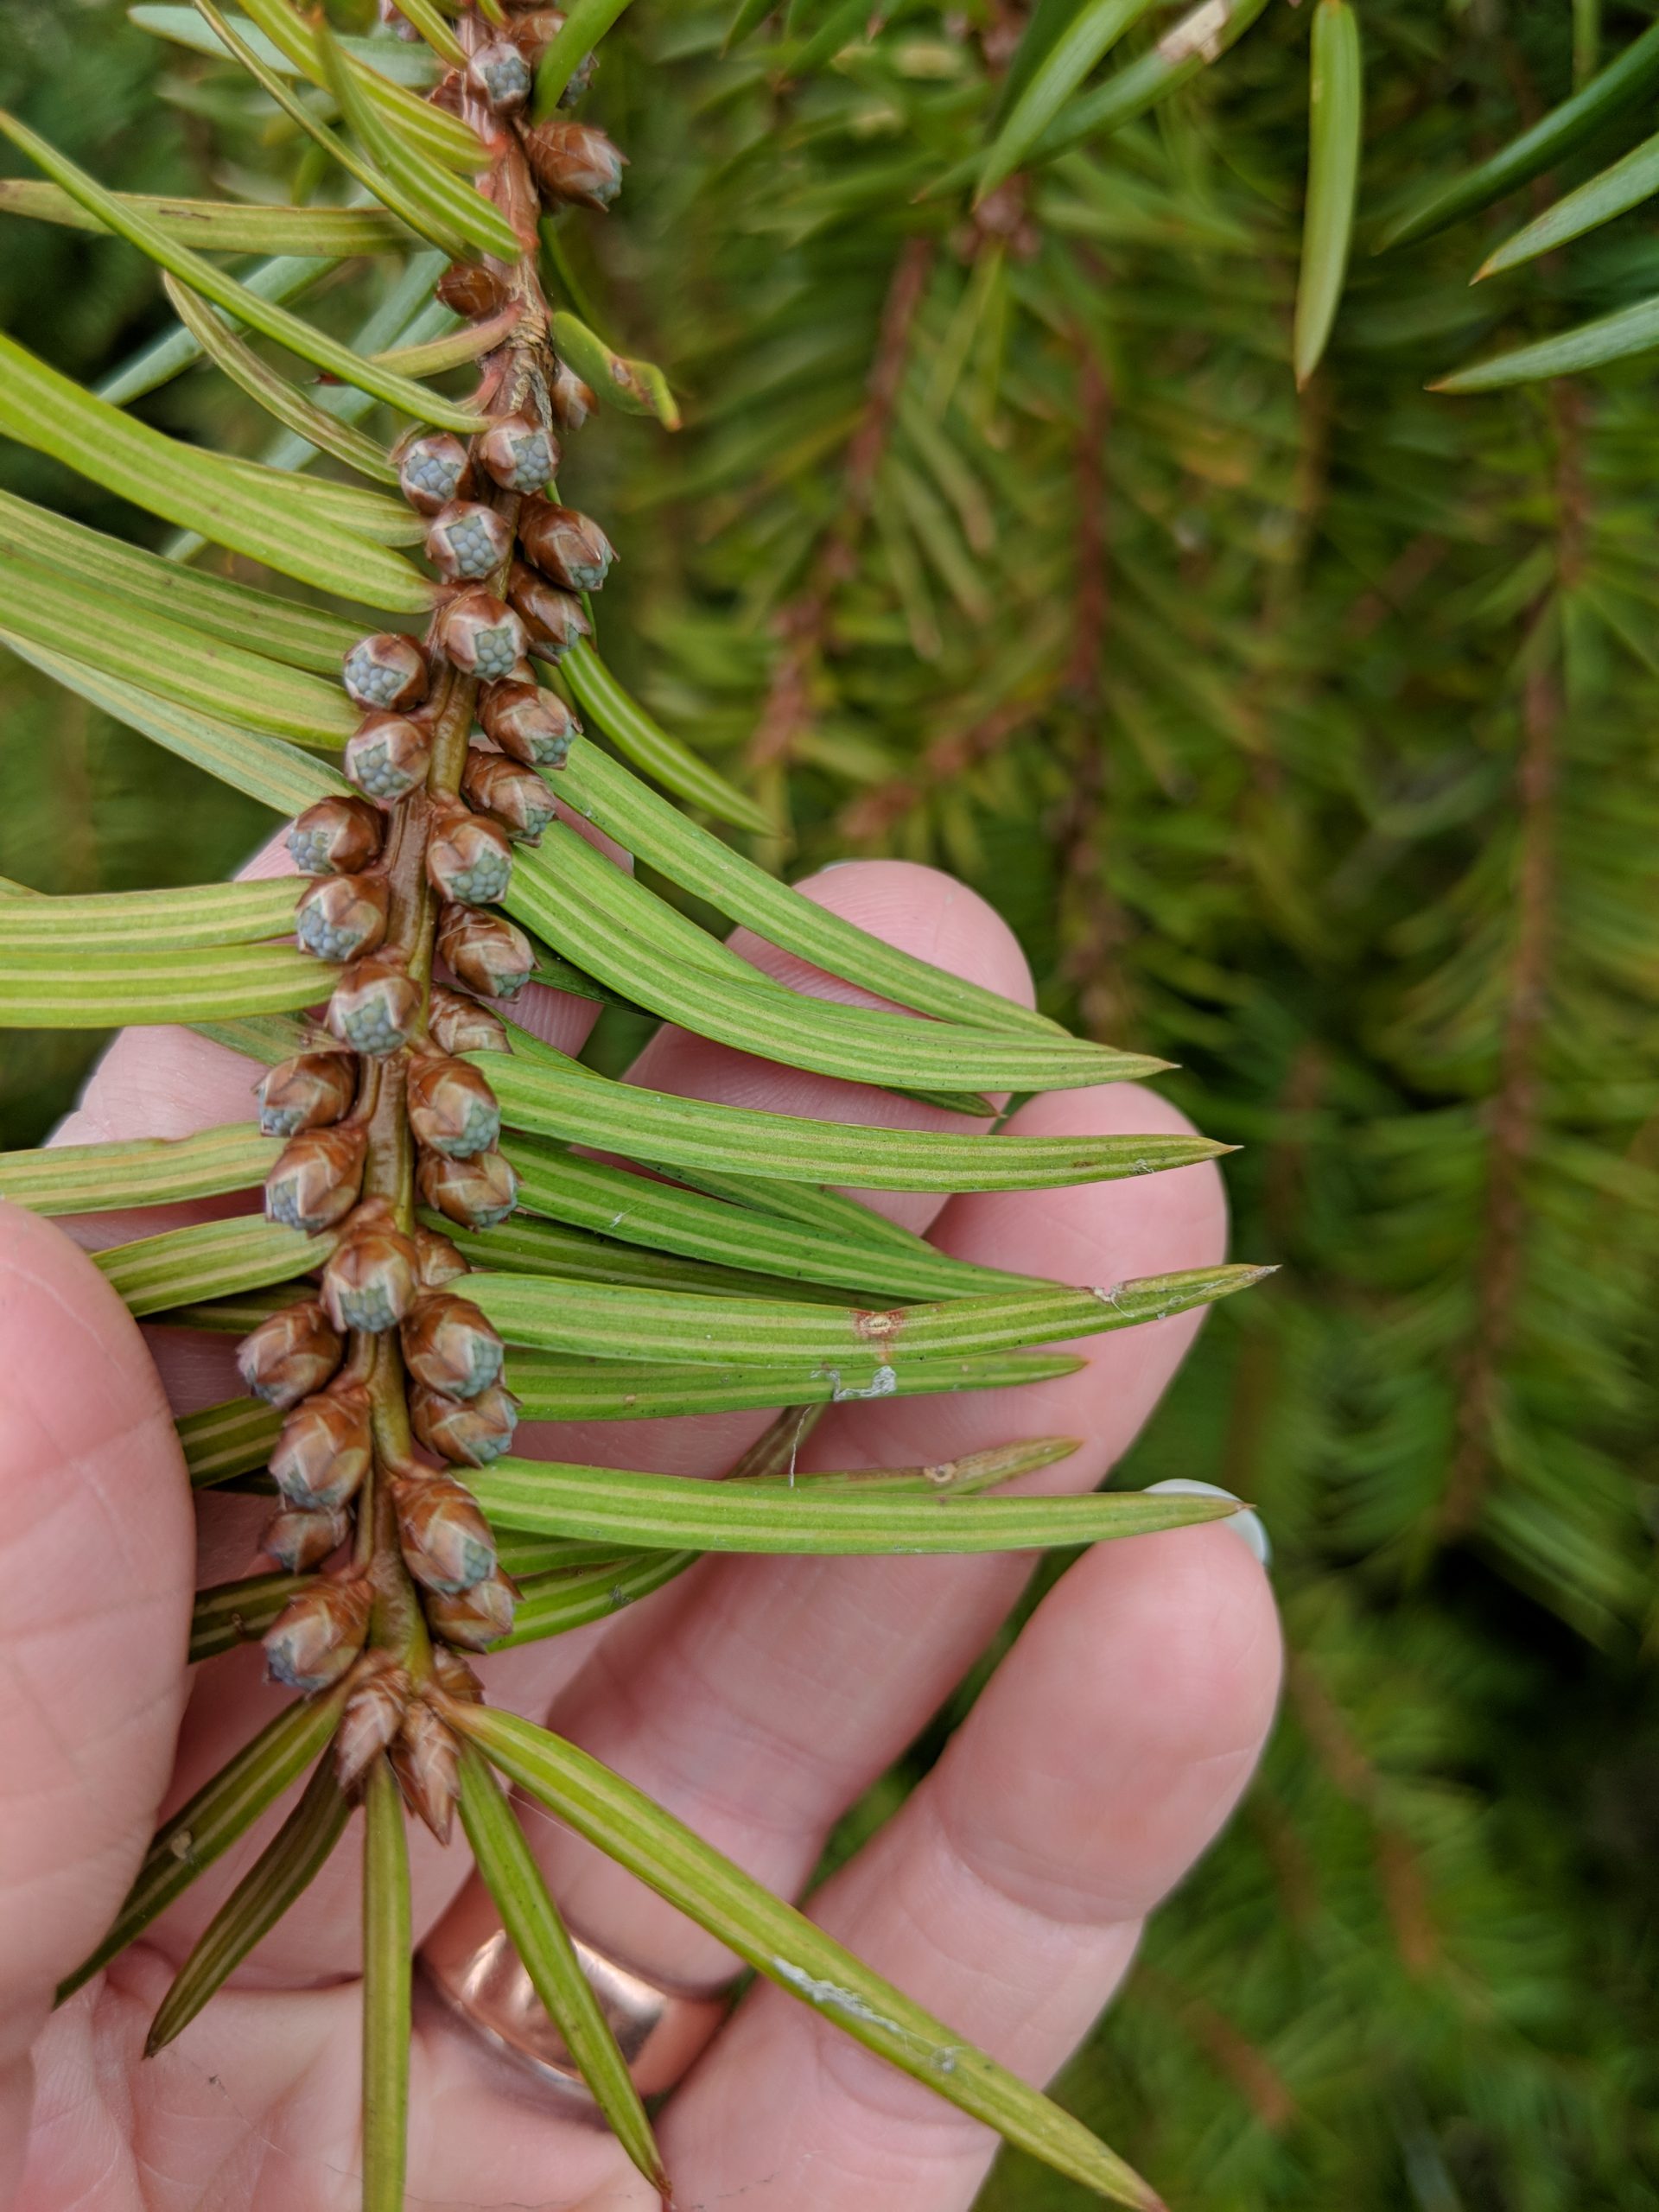 Few Florida torreya trees are producing cones in the wild. Many of the seeds the ABG team uses for conservation work come from their grove grown from cuttings.